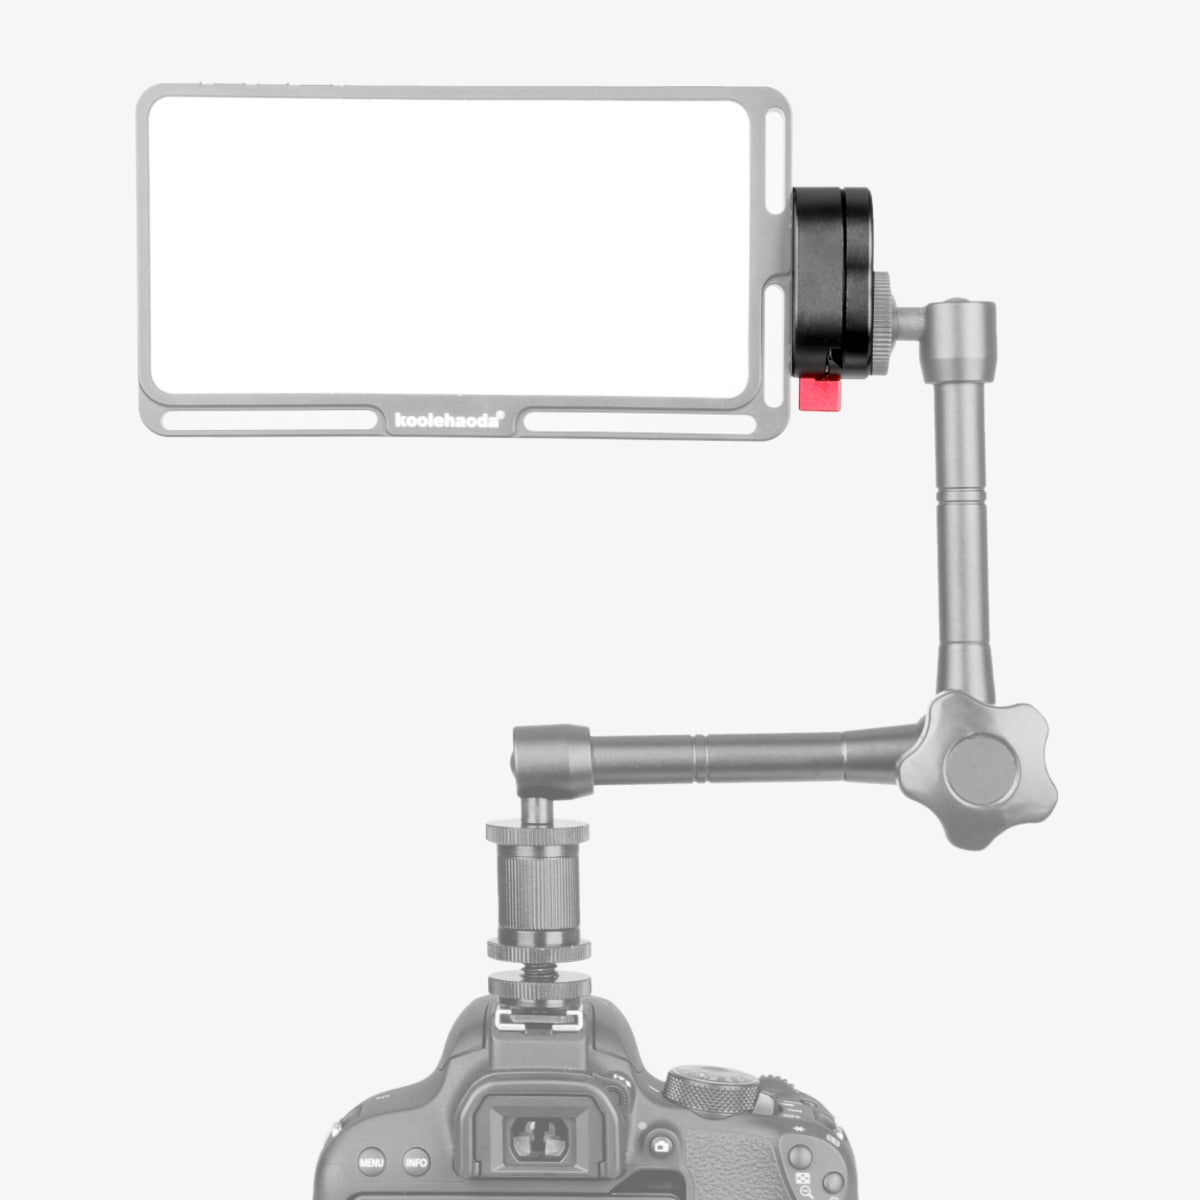 1/4" Mini Quick Release Plate System for Tripod, Articulated Arm, Mount LCD Monitors, Magic Arm, LED Light